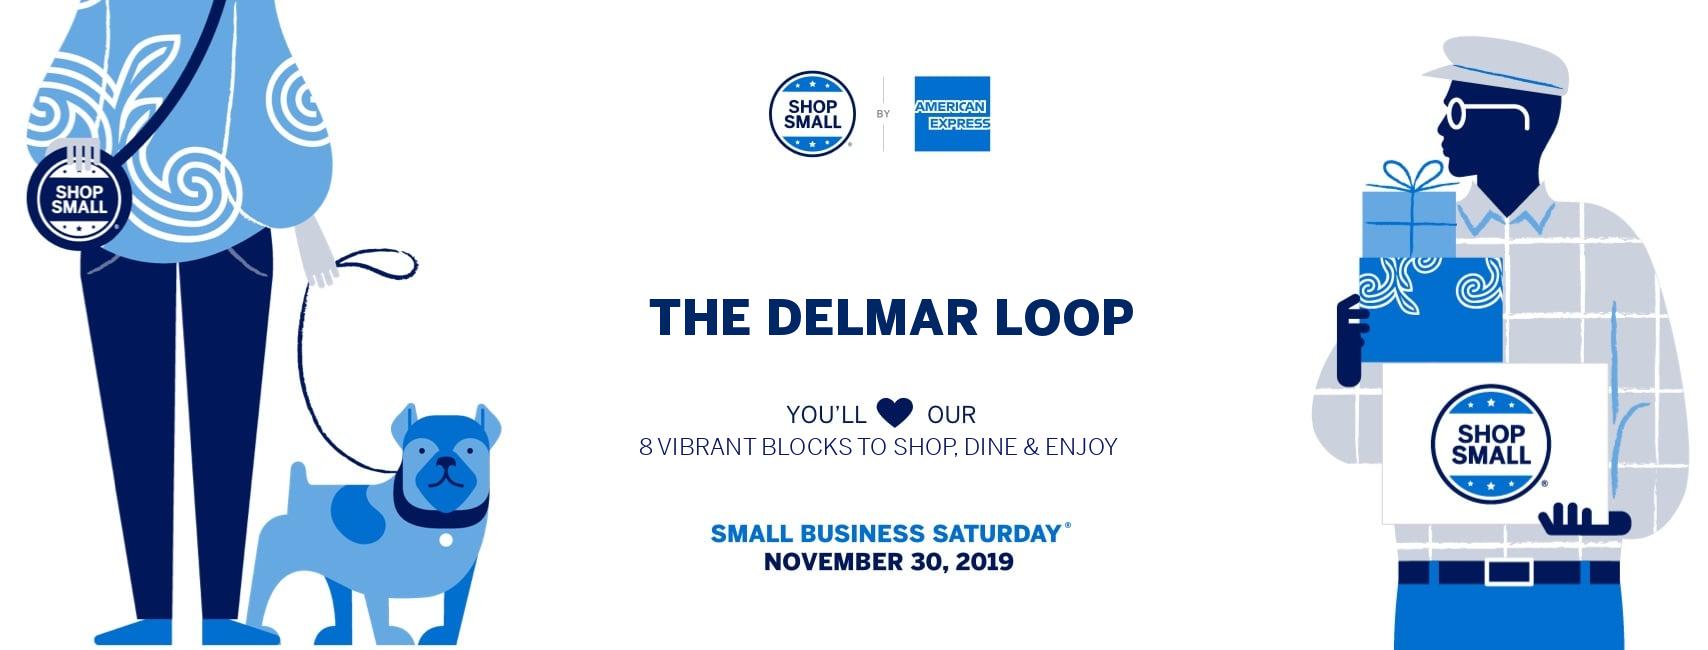 Small Business Saturday is November 30th